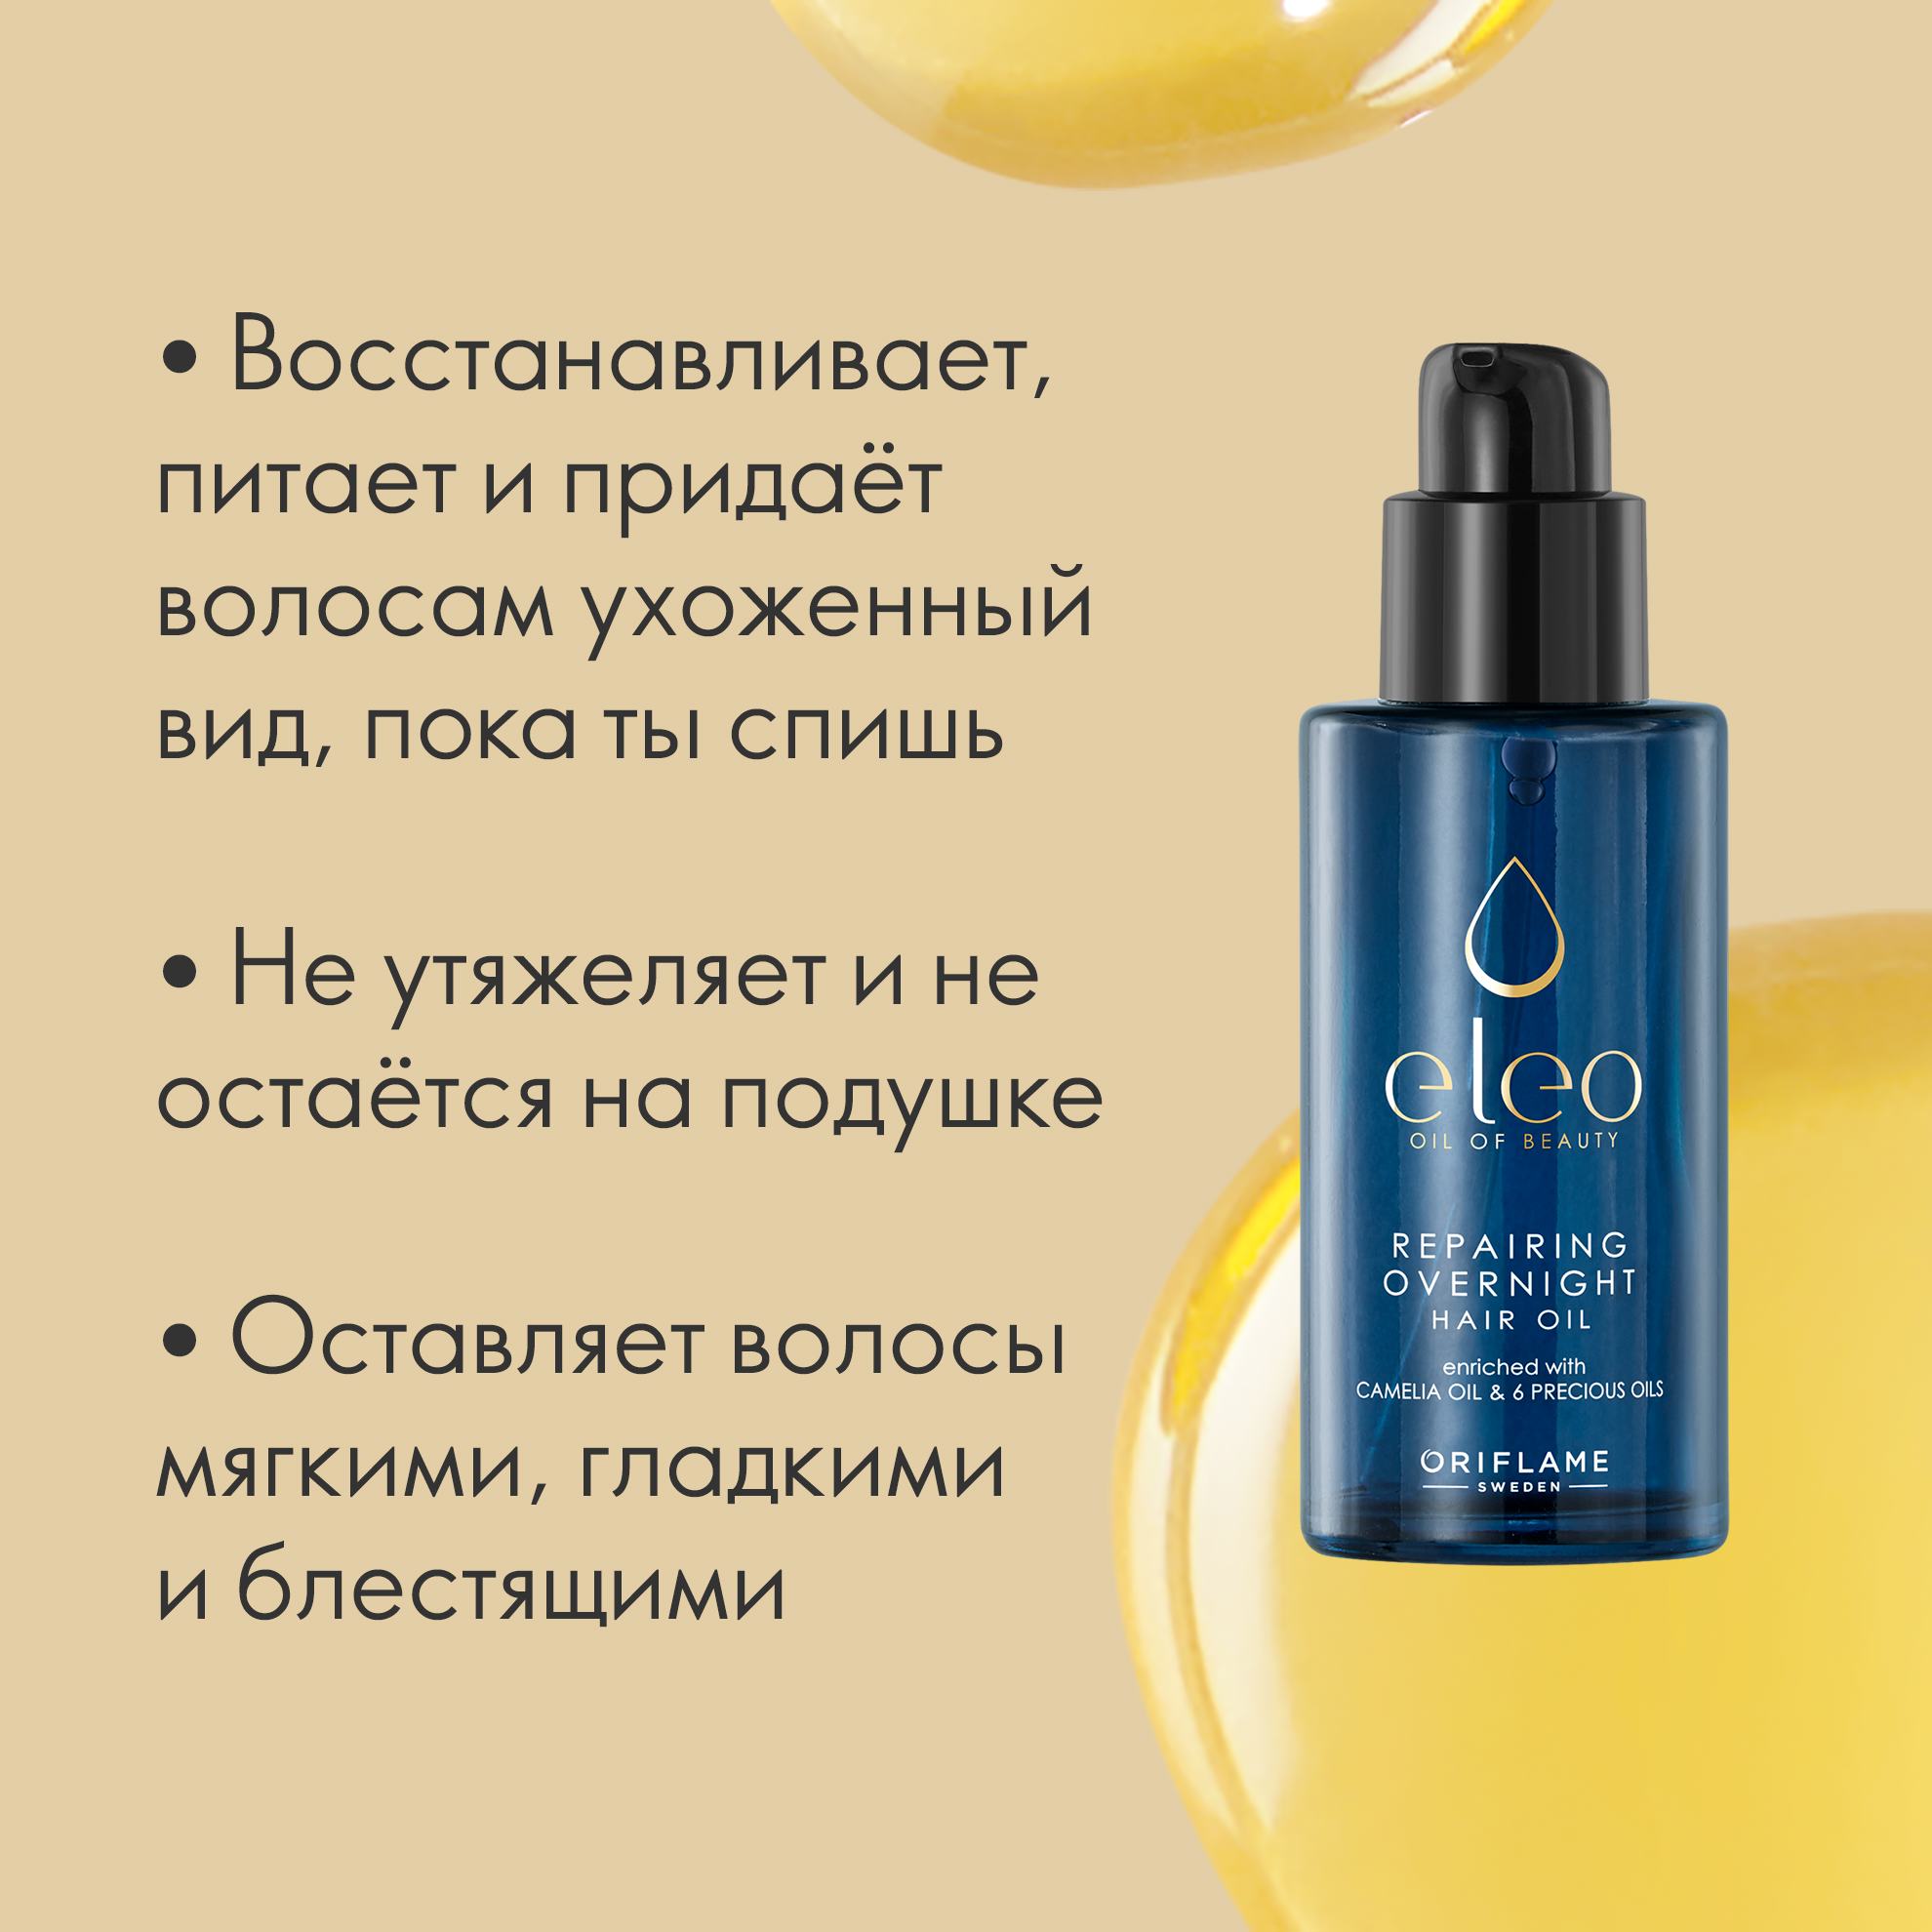 https://media-cdn.oriflame.com/productImage?externalMediaId=product-management-media%2fProducts%2f38602%2fBY%2f38602_3.png&id=15404497&version=1